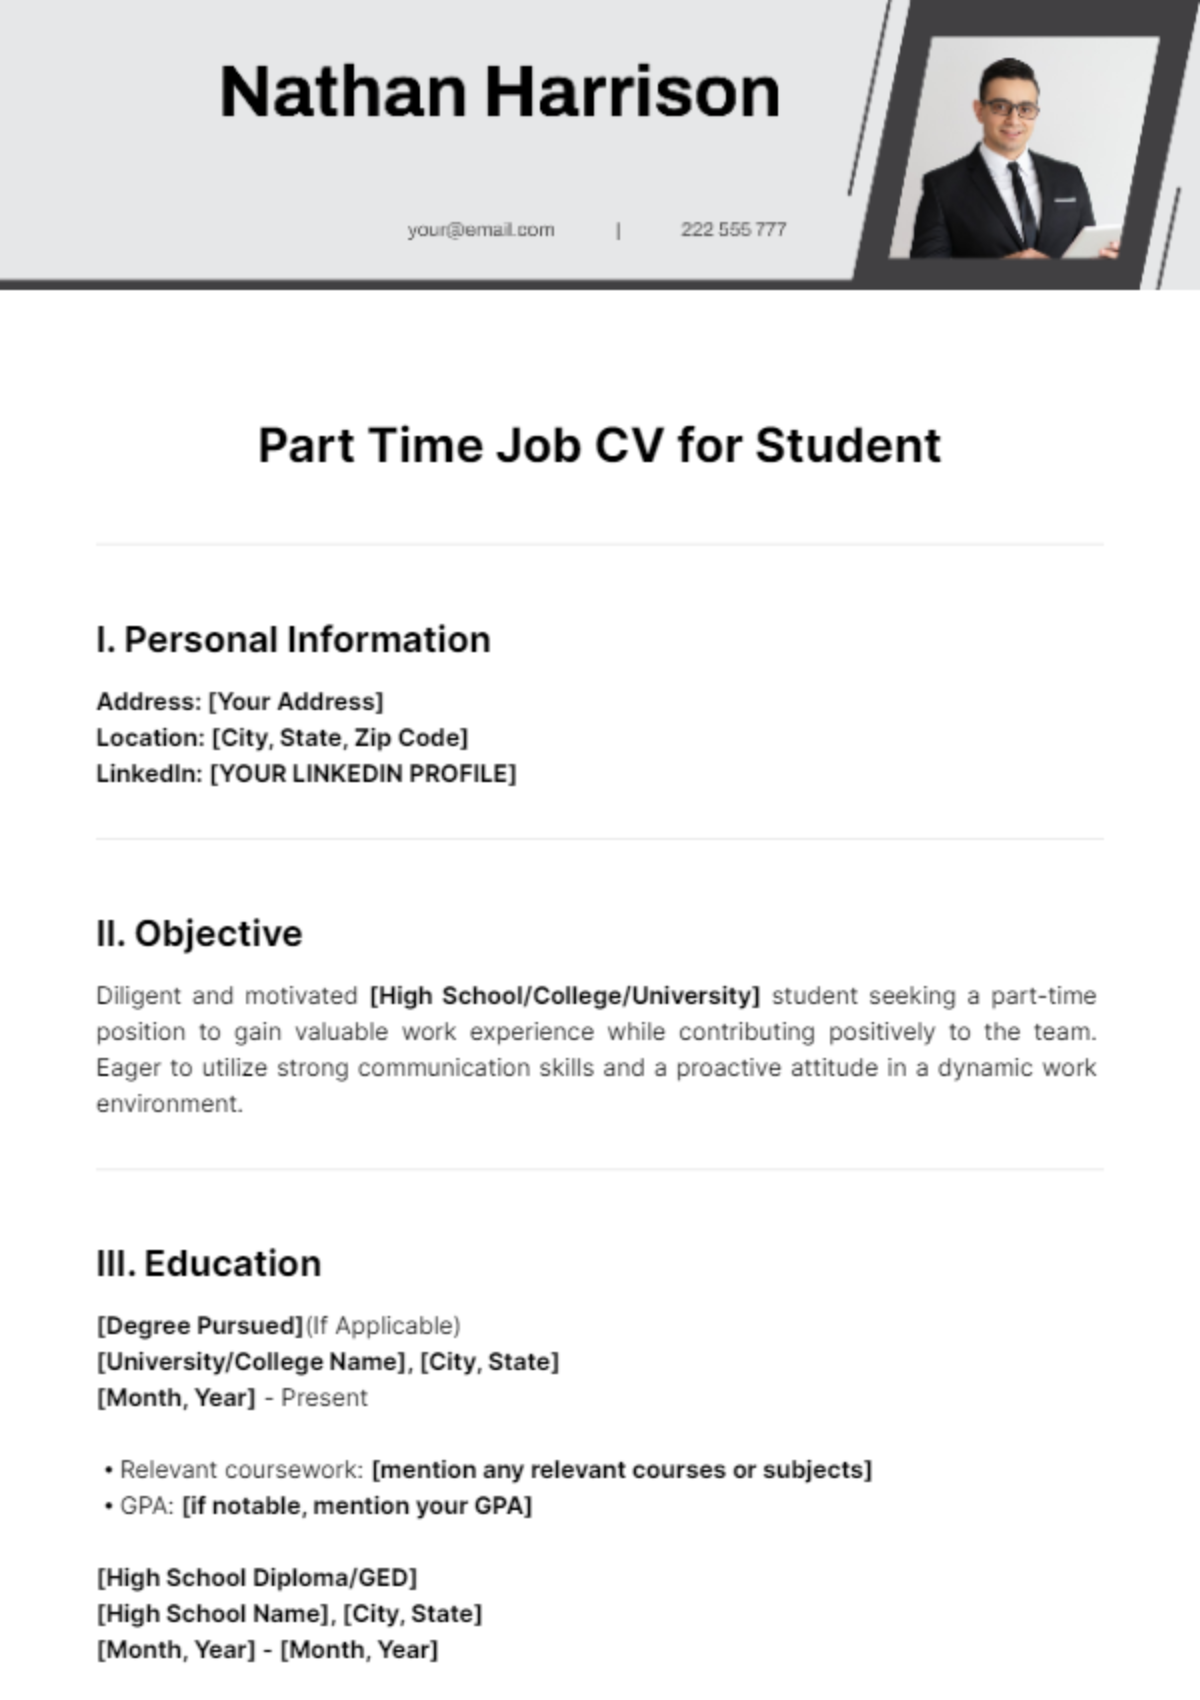 Part Time Job CV for Student Template